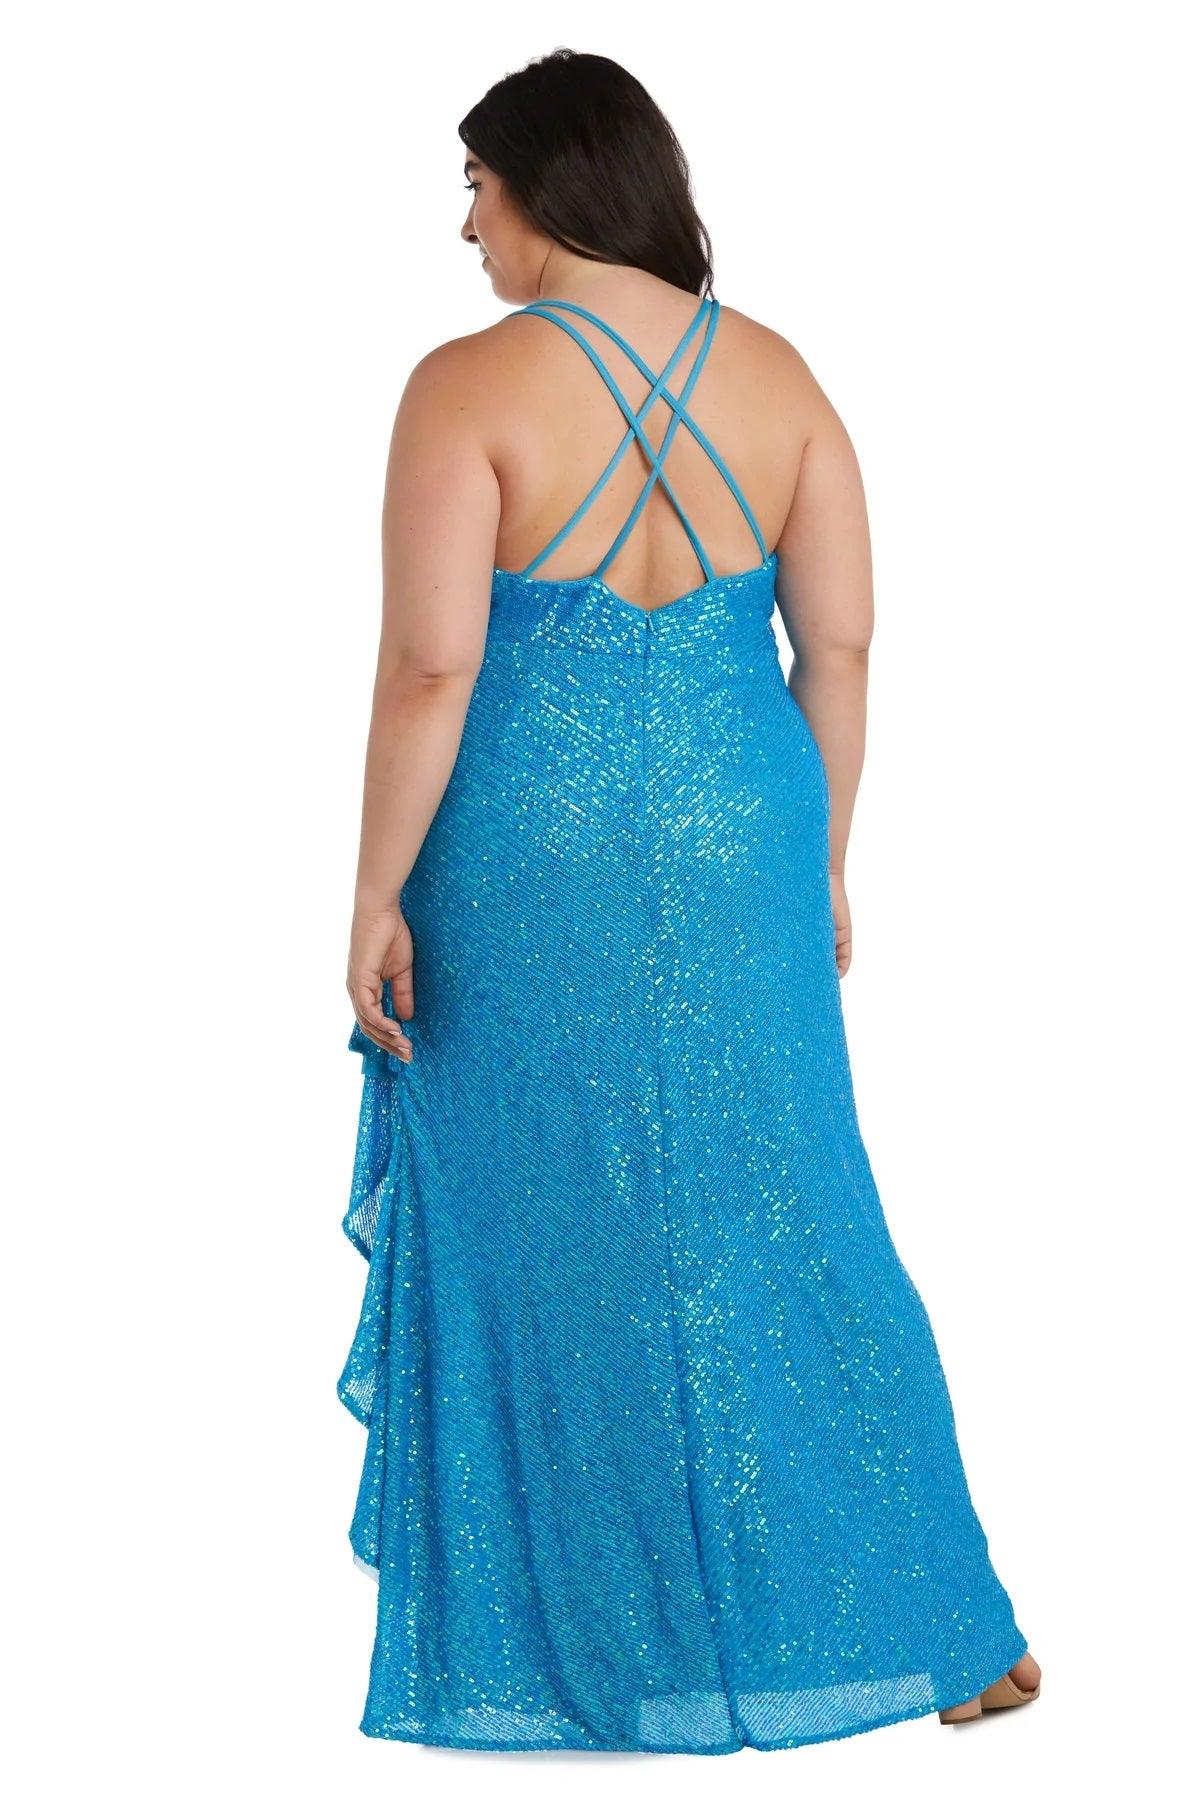 Morgan & Co 13029WM Plus Size High Low Prom Dress for $105.99 – The ...